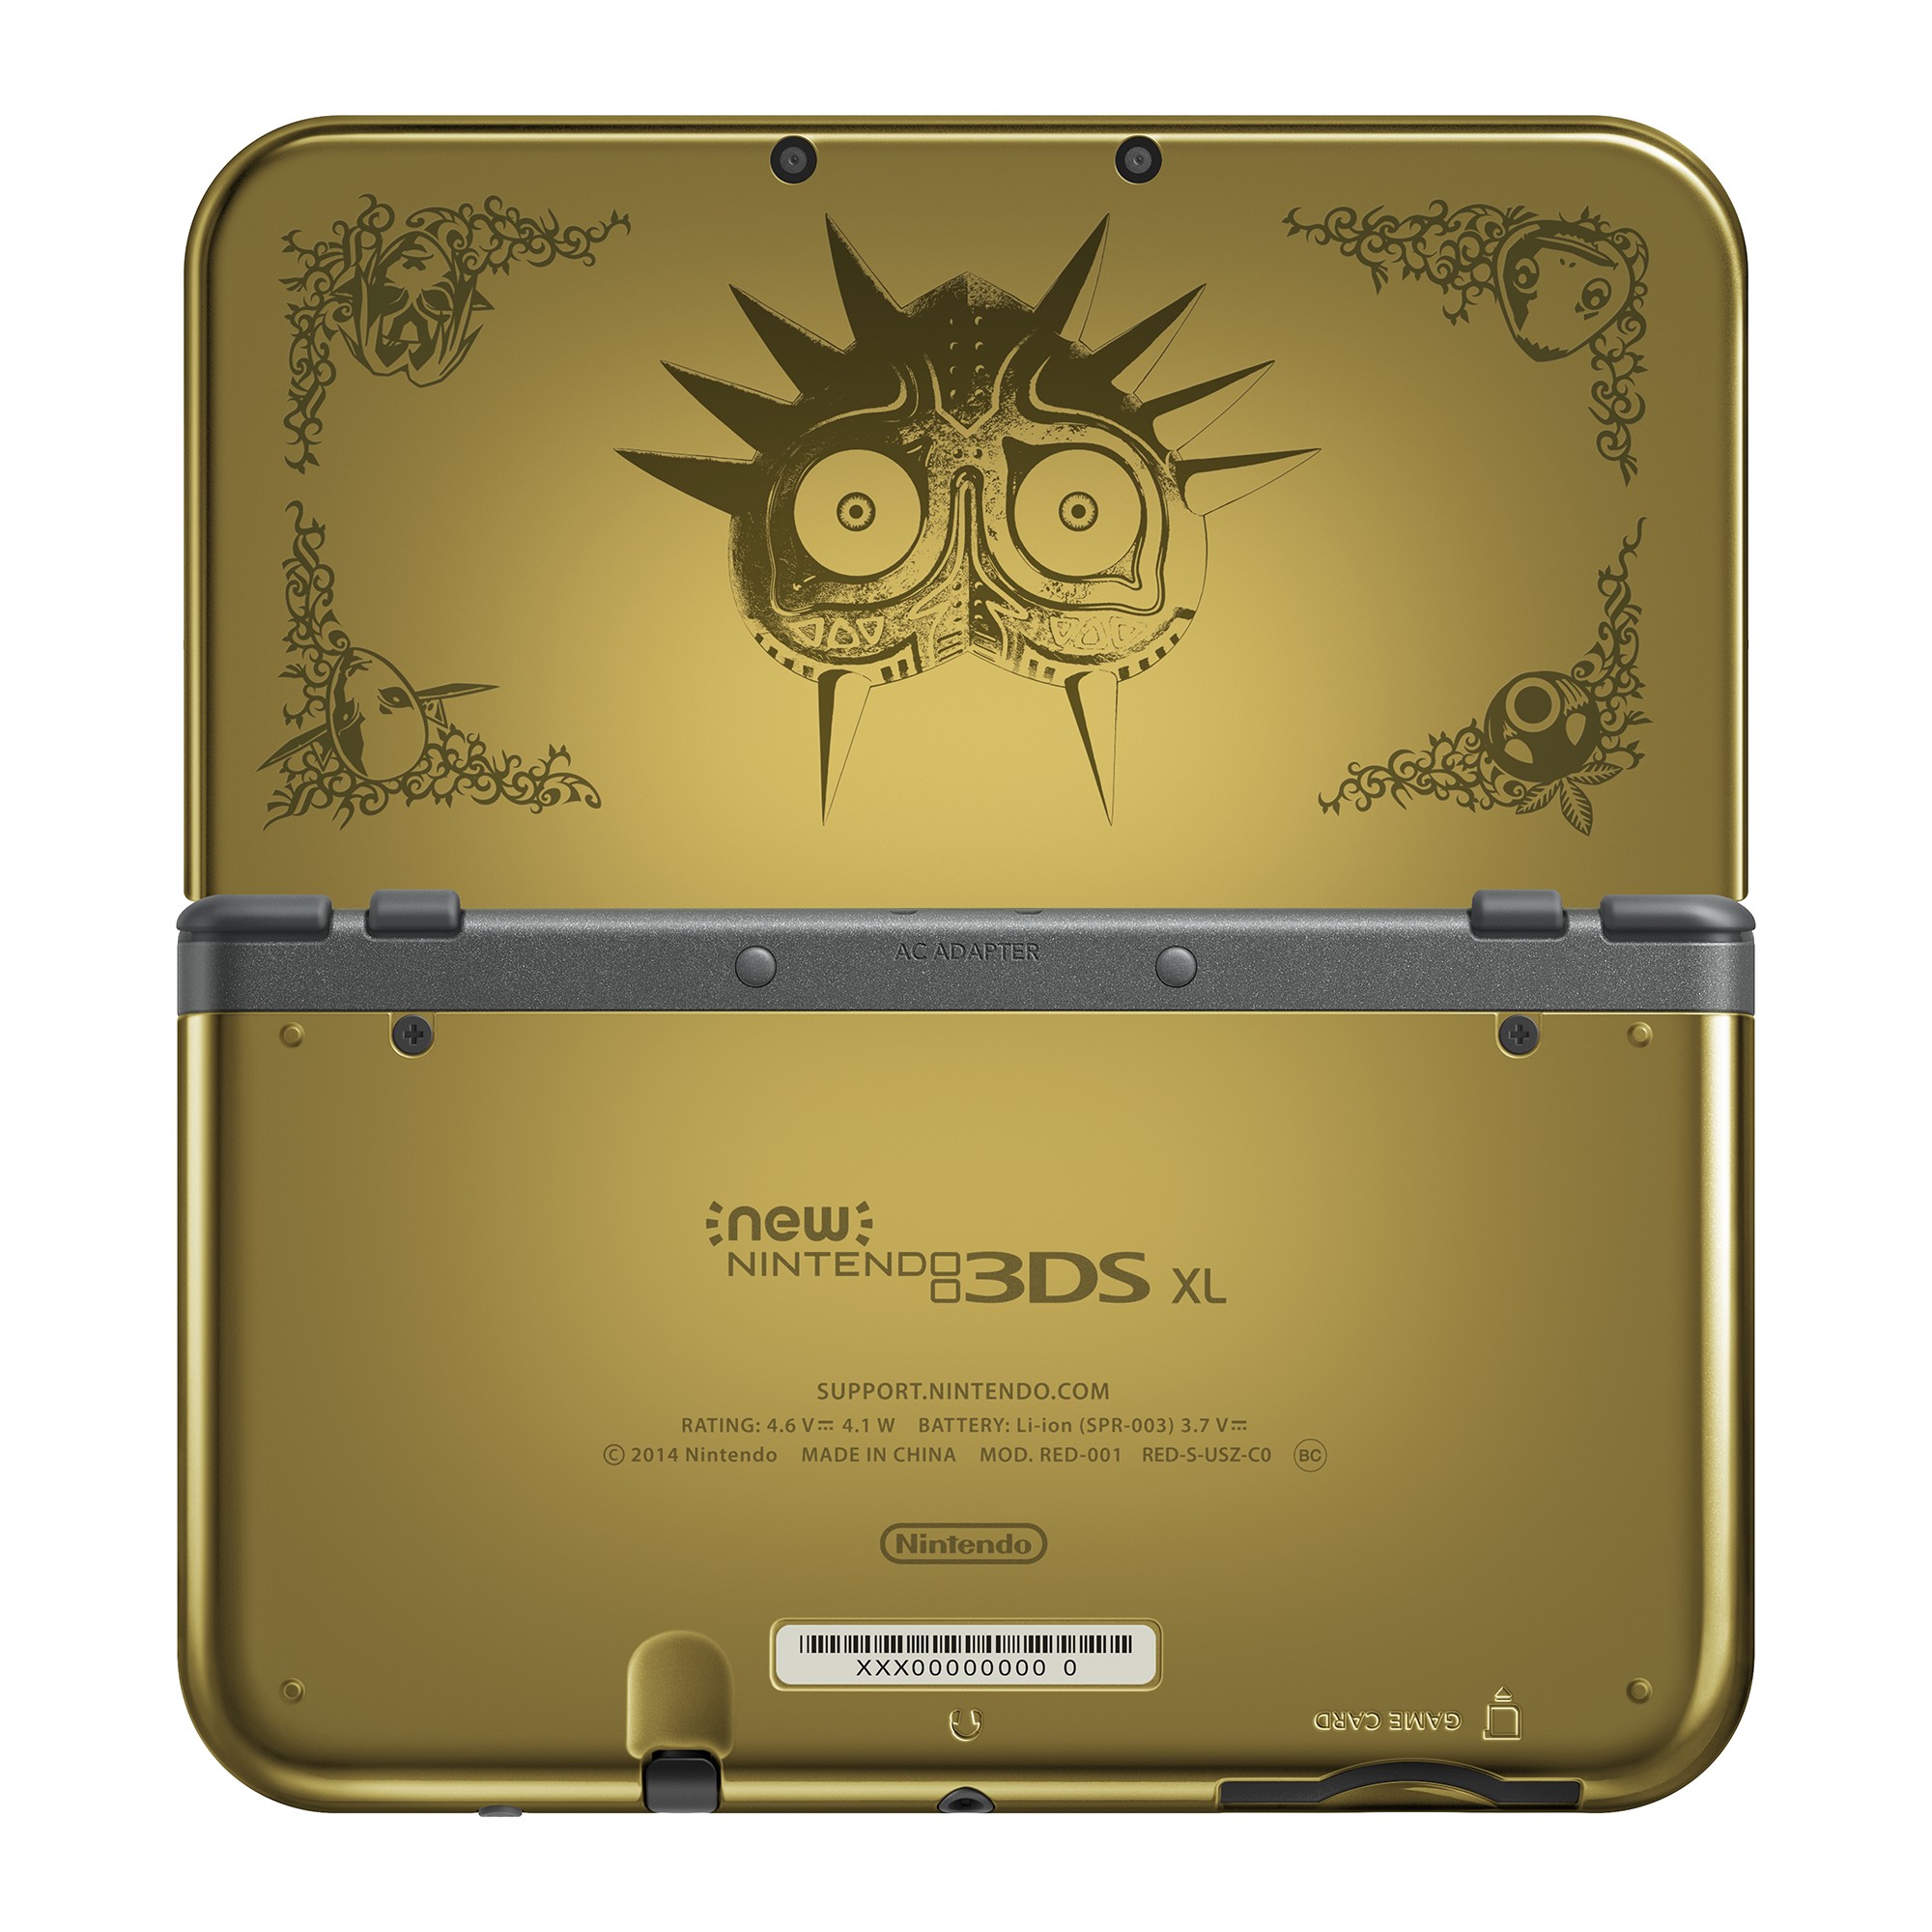 The-Legend-of-Zelda-Majora-s-Mask-3D-Is-Coming-with-Special-New-3DS-XL-in-February-470053-5.jpg